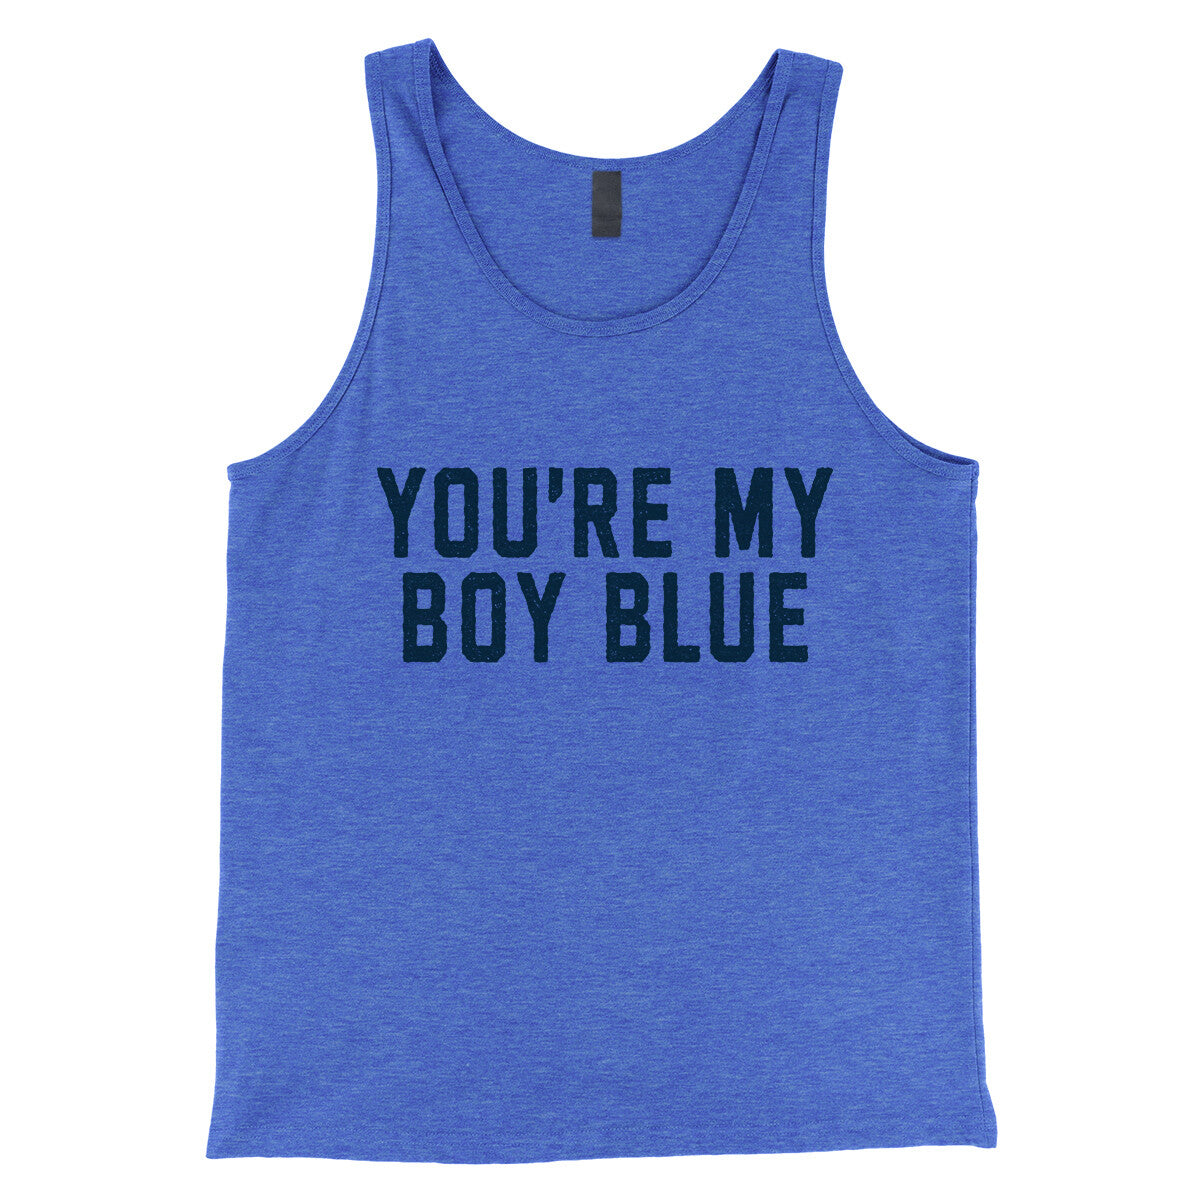 You're my Boy Blue in True Royal TriBlend Color